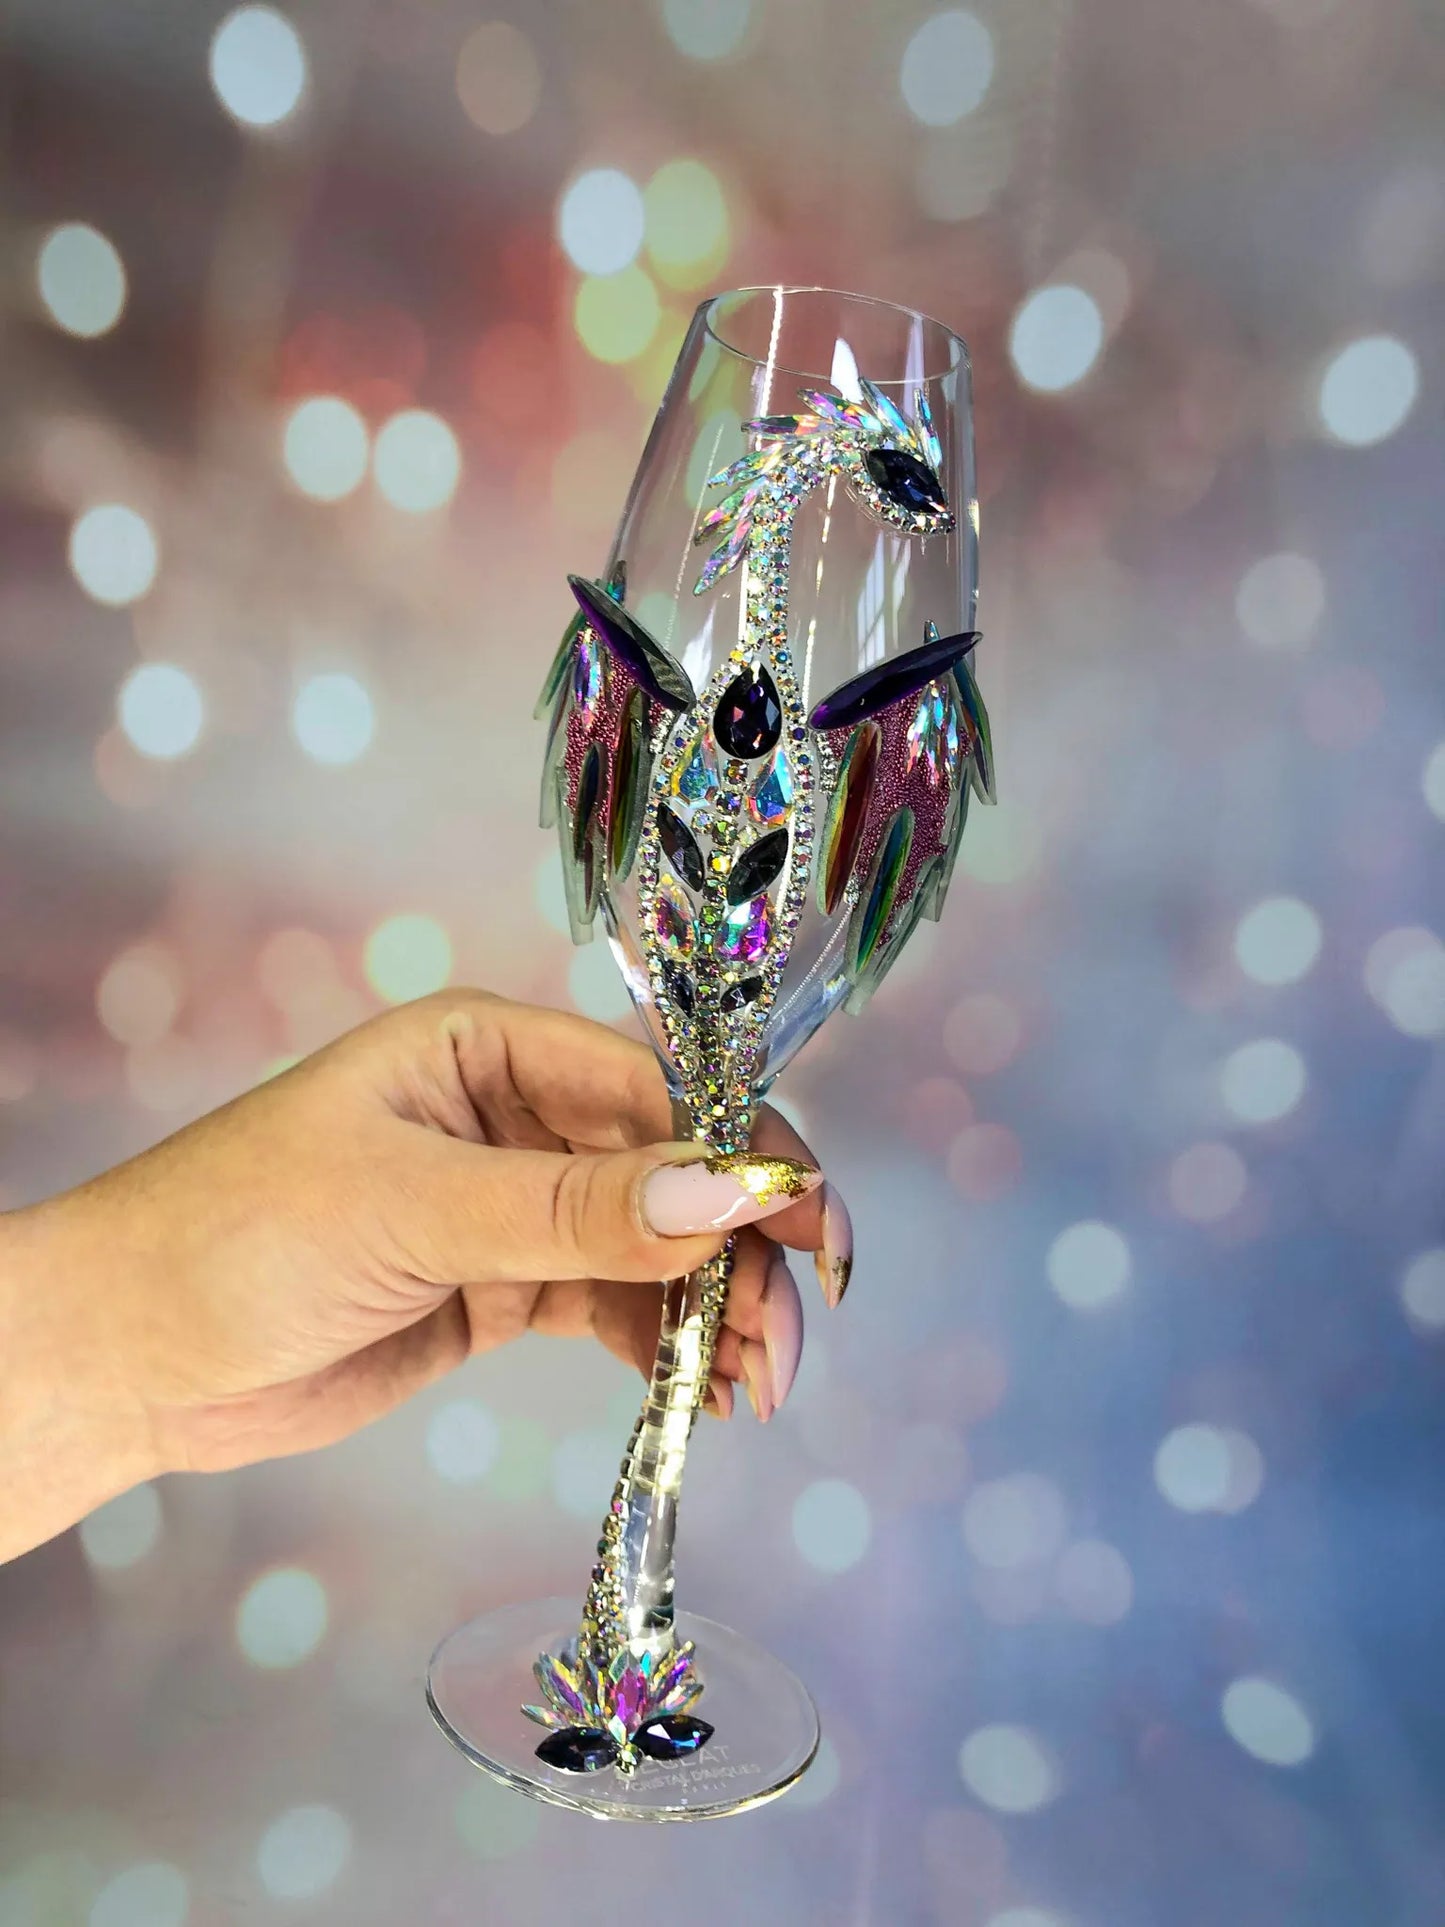 Elegant dragon wineglass held delicately in hand, showcasing its gleaming spiral stem and ornate crystal detailing against soft-focus lights.